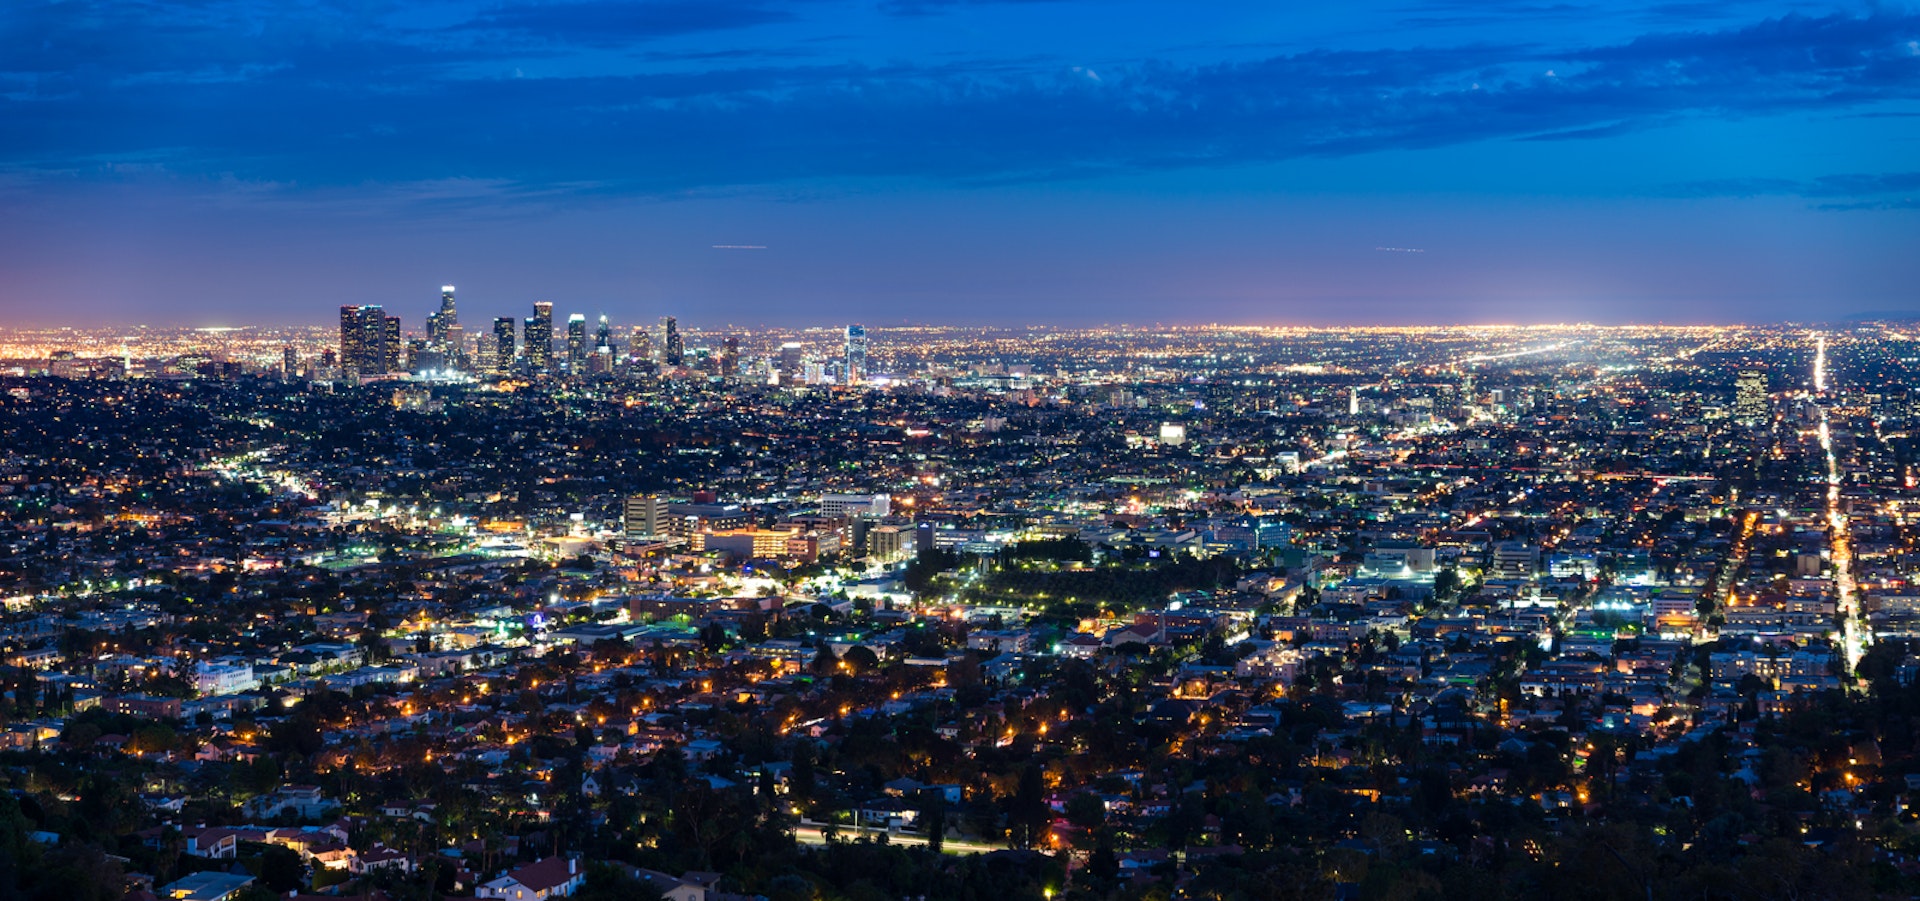 Bright lights, plenty of things to do - Los Angeles has you covered whatever your interests © Westend61/Getty Images